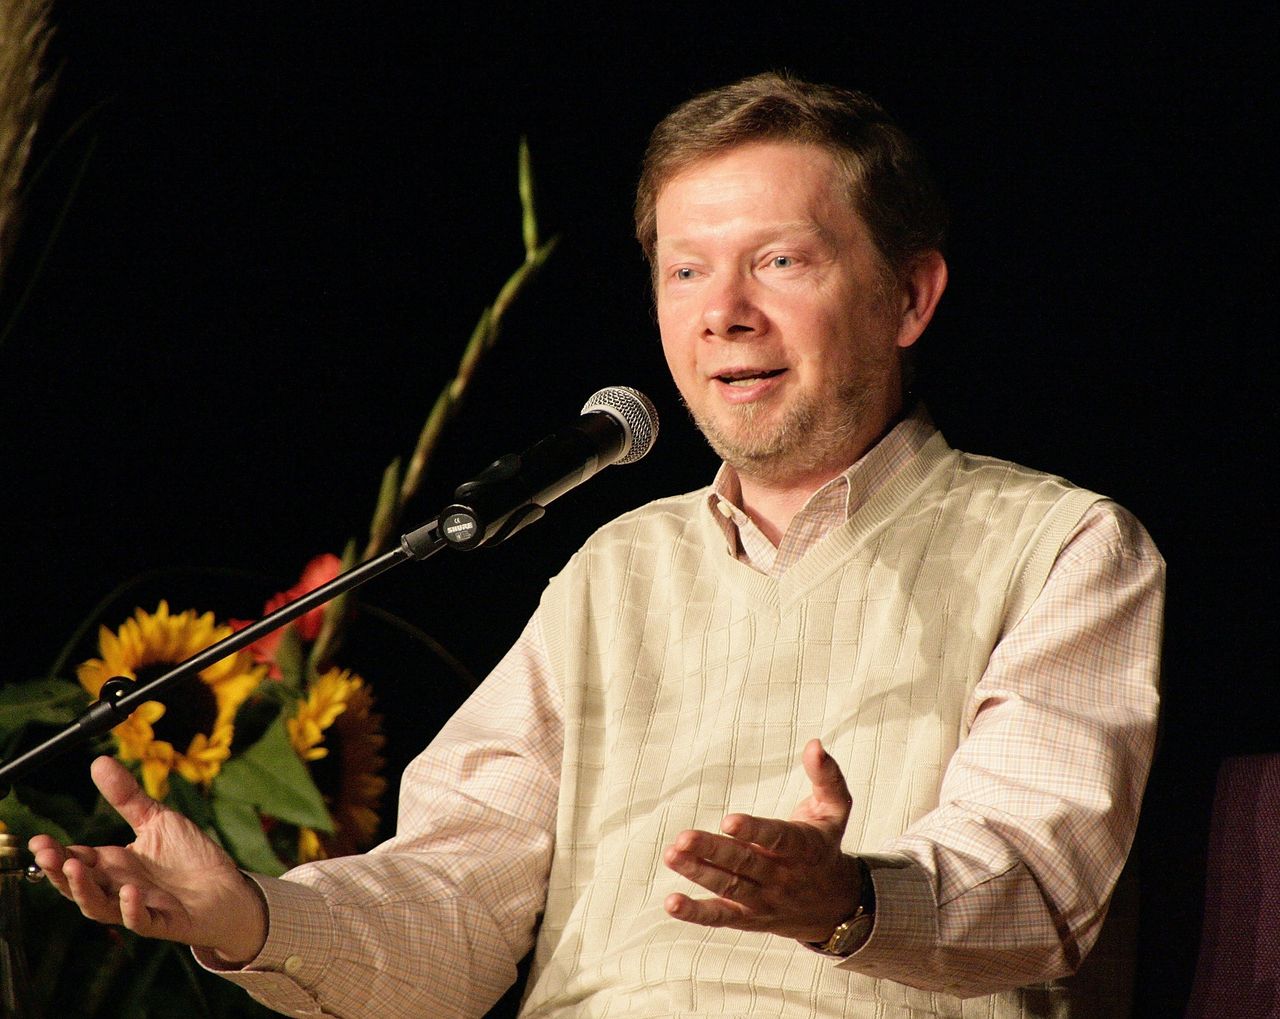 Eckhart Tolle during a reading in Berlin in 2007.